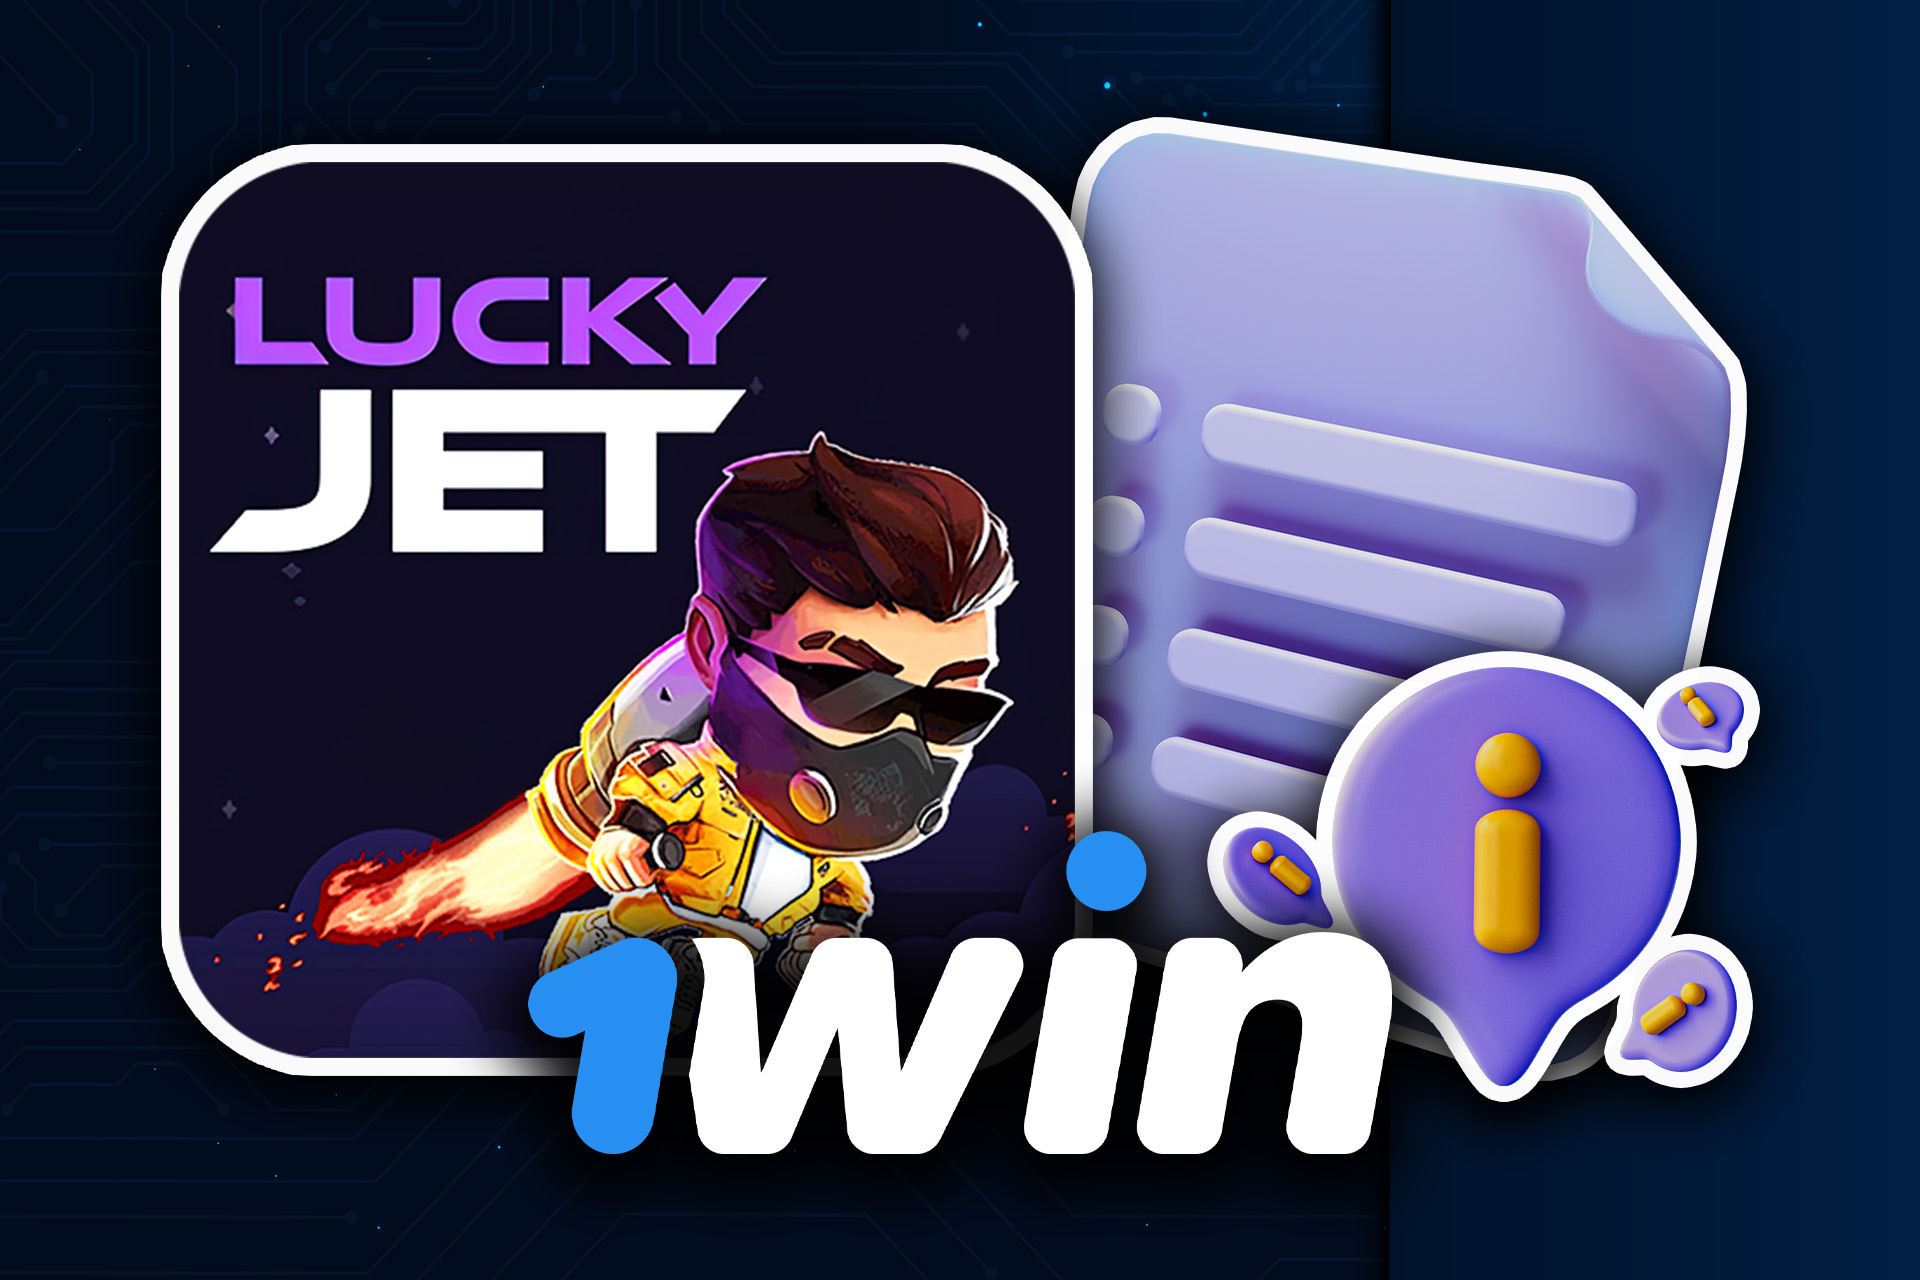 Follow these rules while playing Lucky Jet.